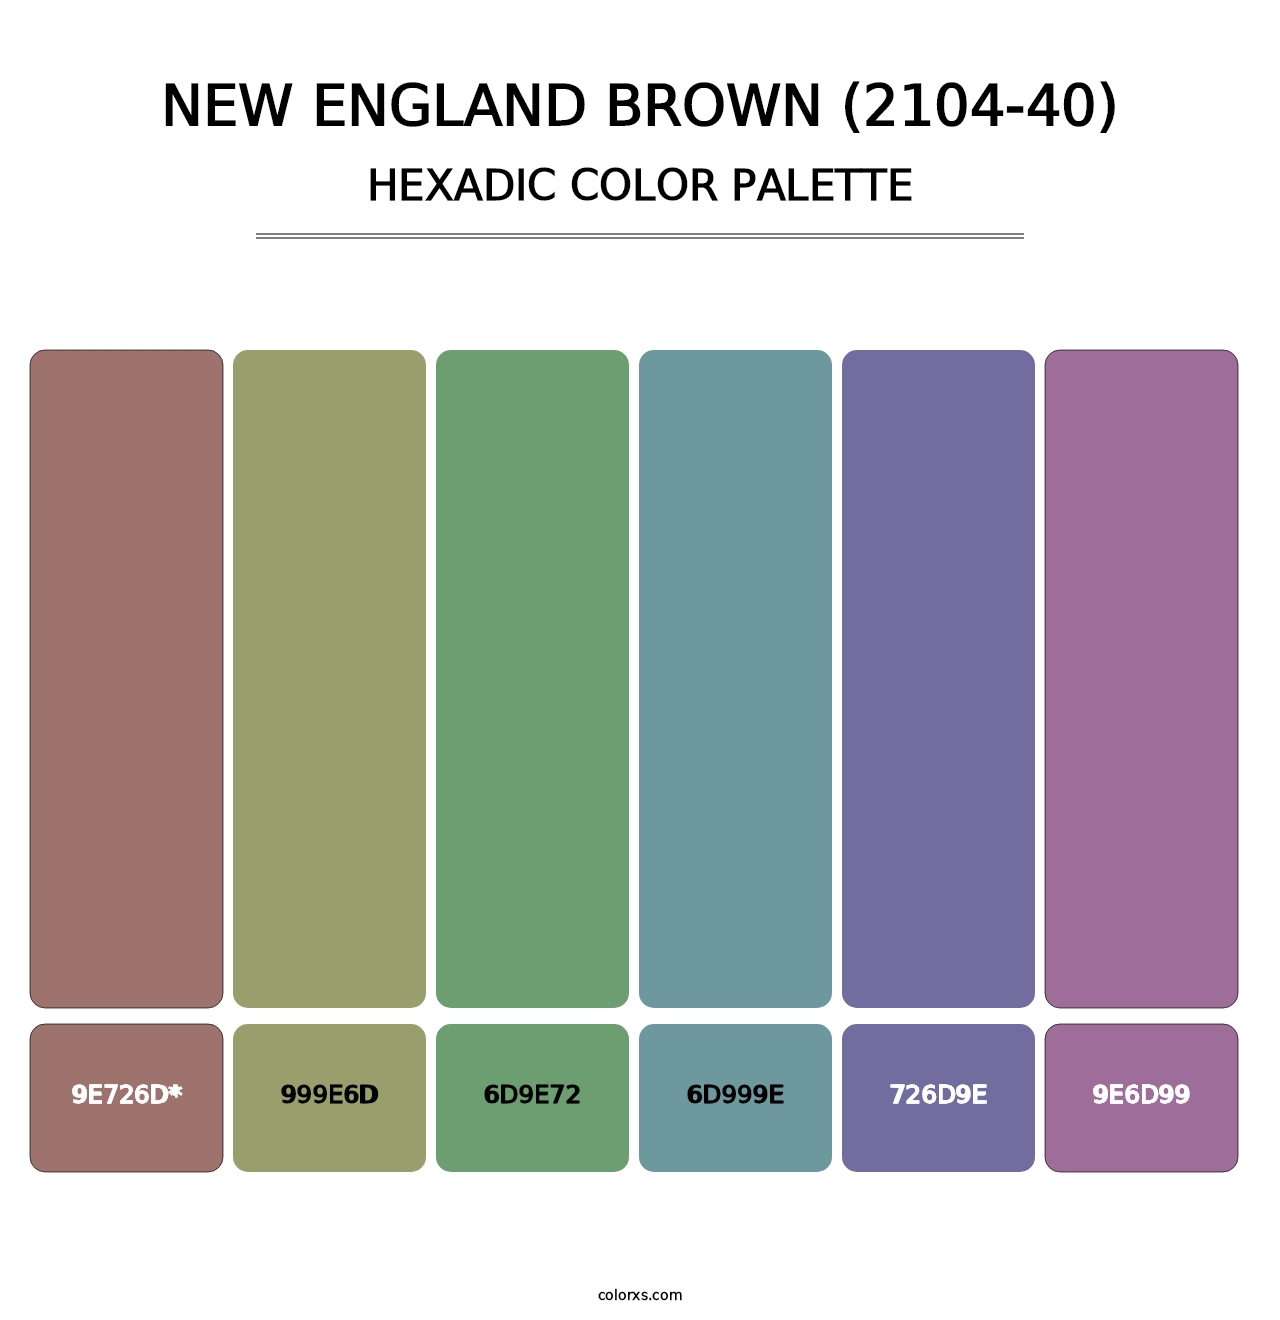 New England Brown (2104-40) - Hexadic Color Palette